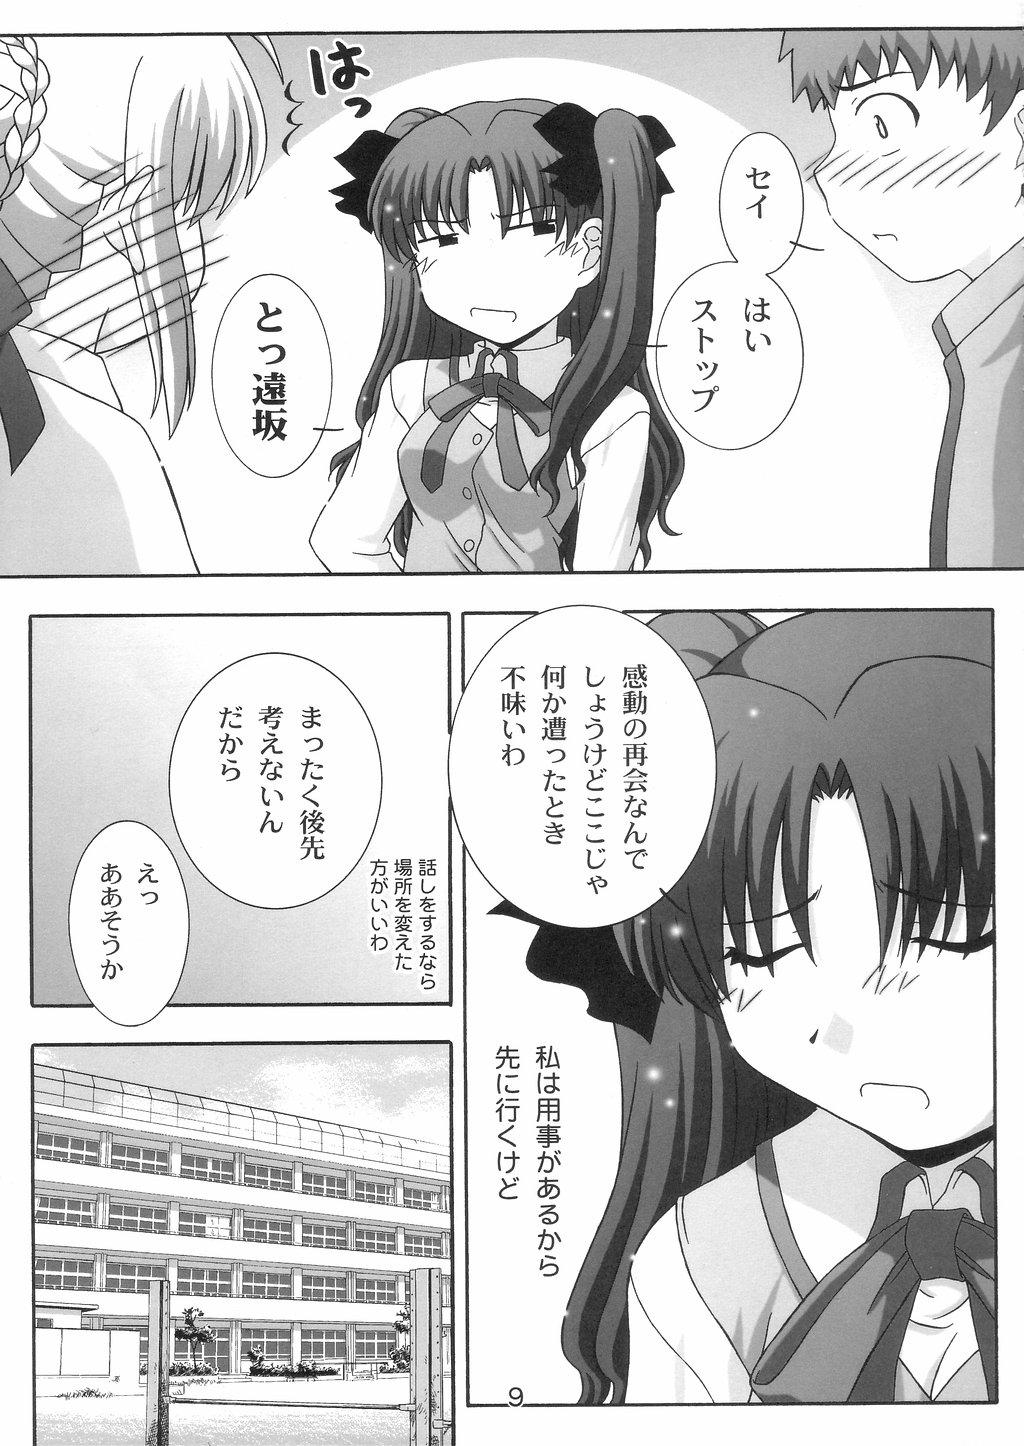 Boys Secret file next 10 - I feel my Fate - Fate stay night Couch - Page 8